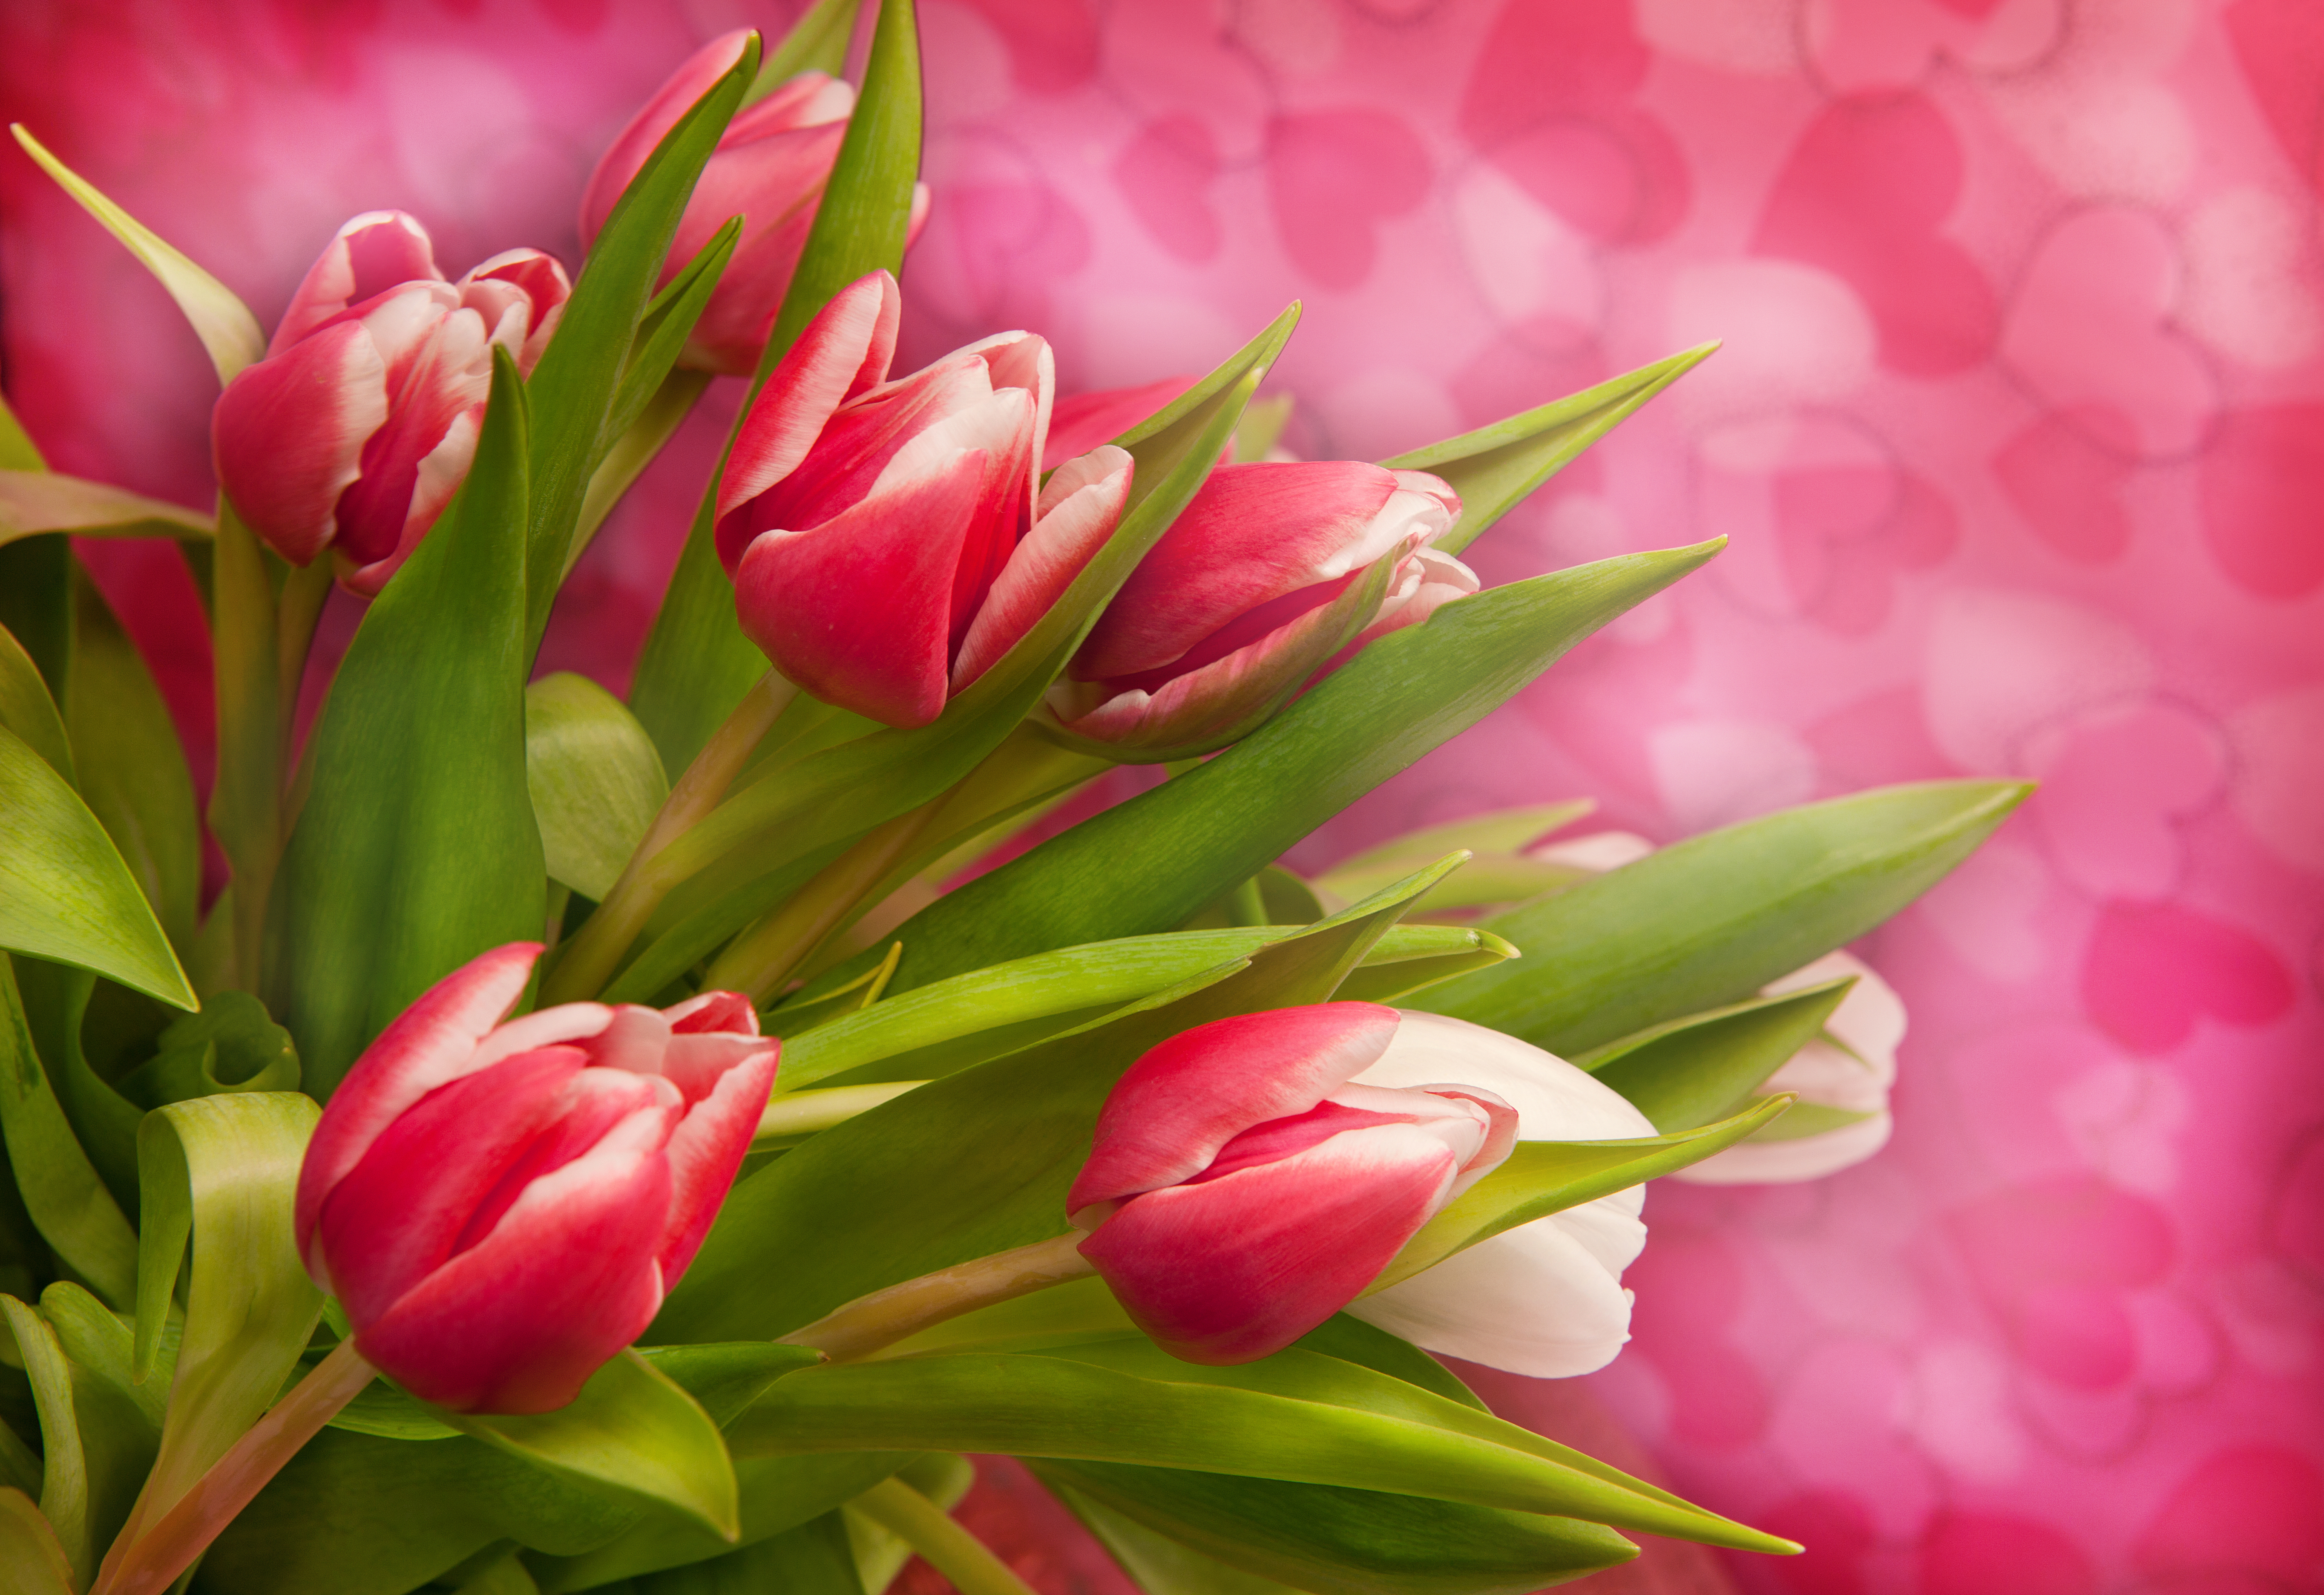 Wallpapers pink background flora tulips on the desktop